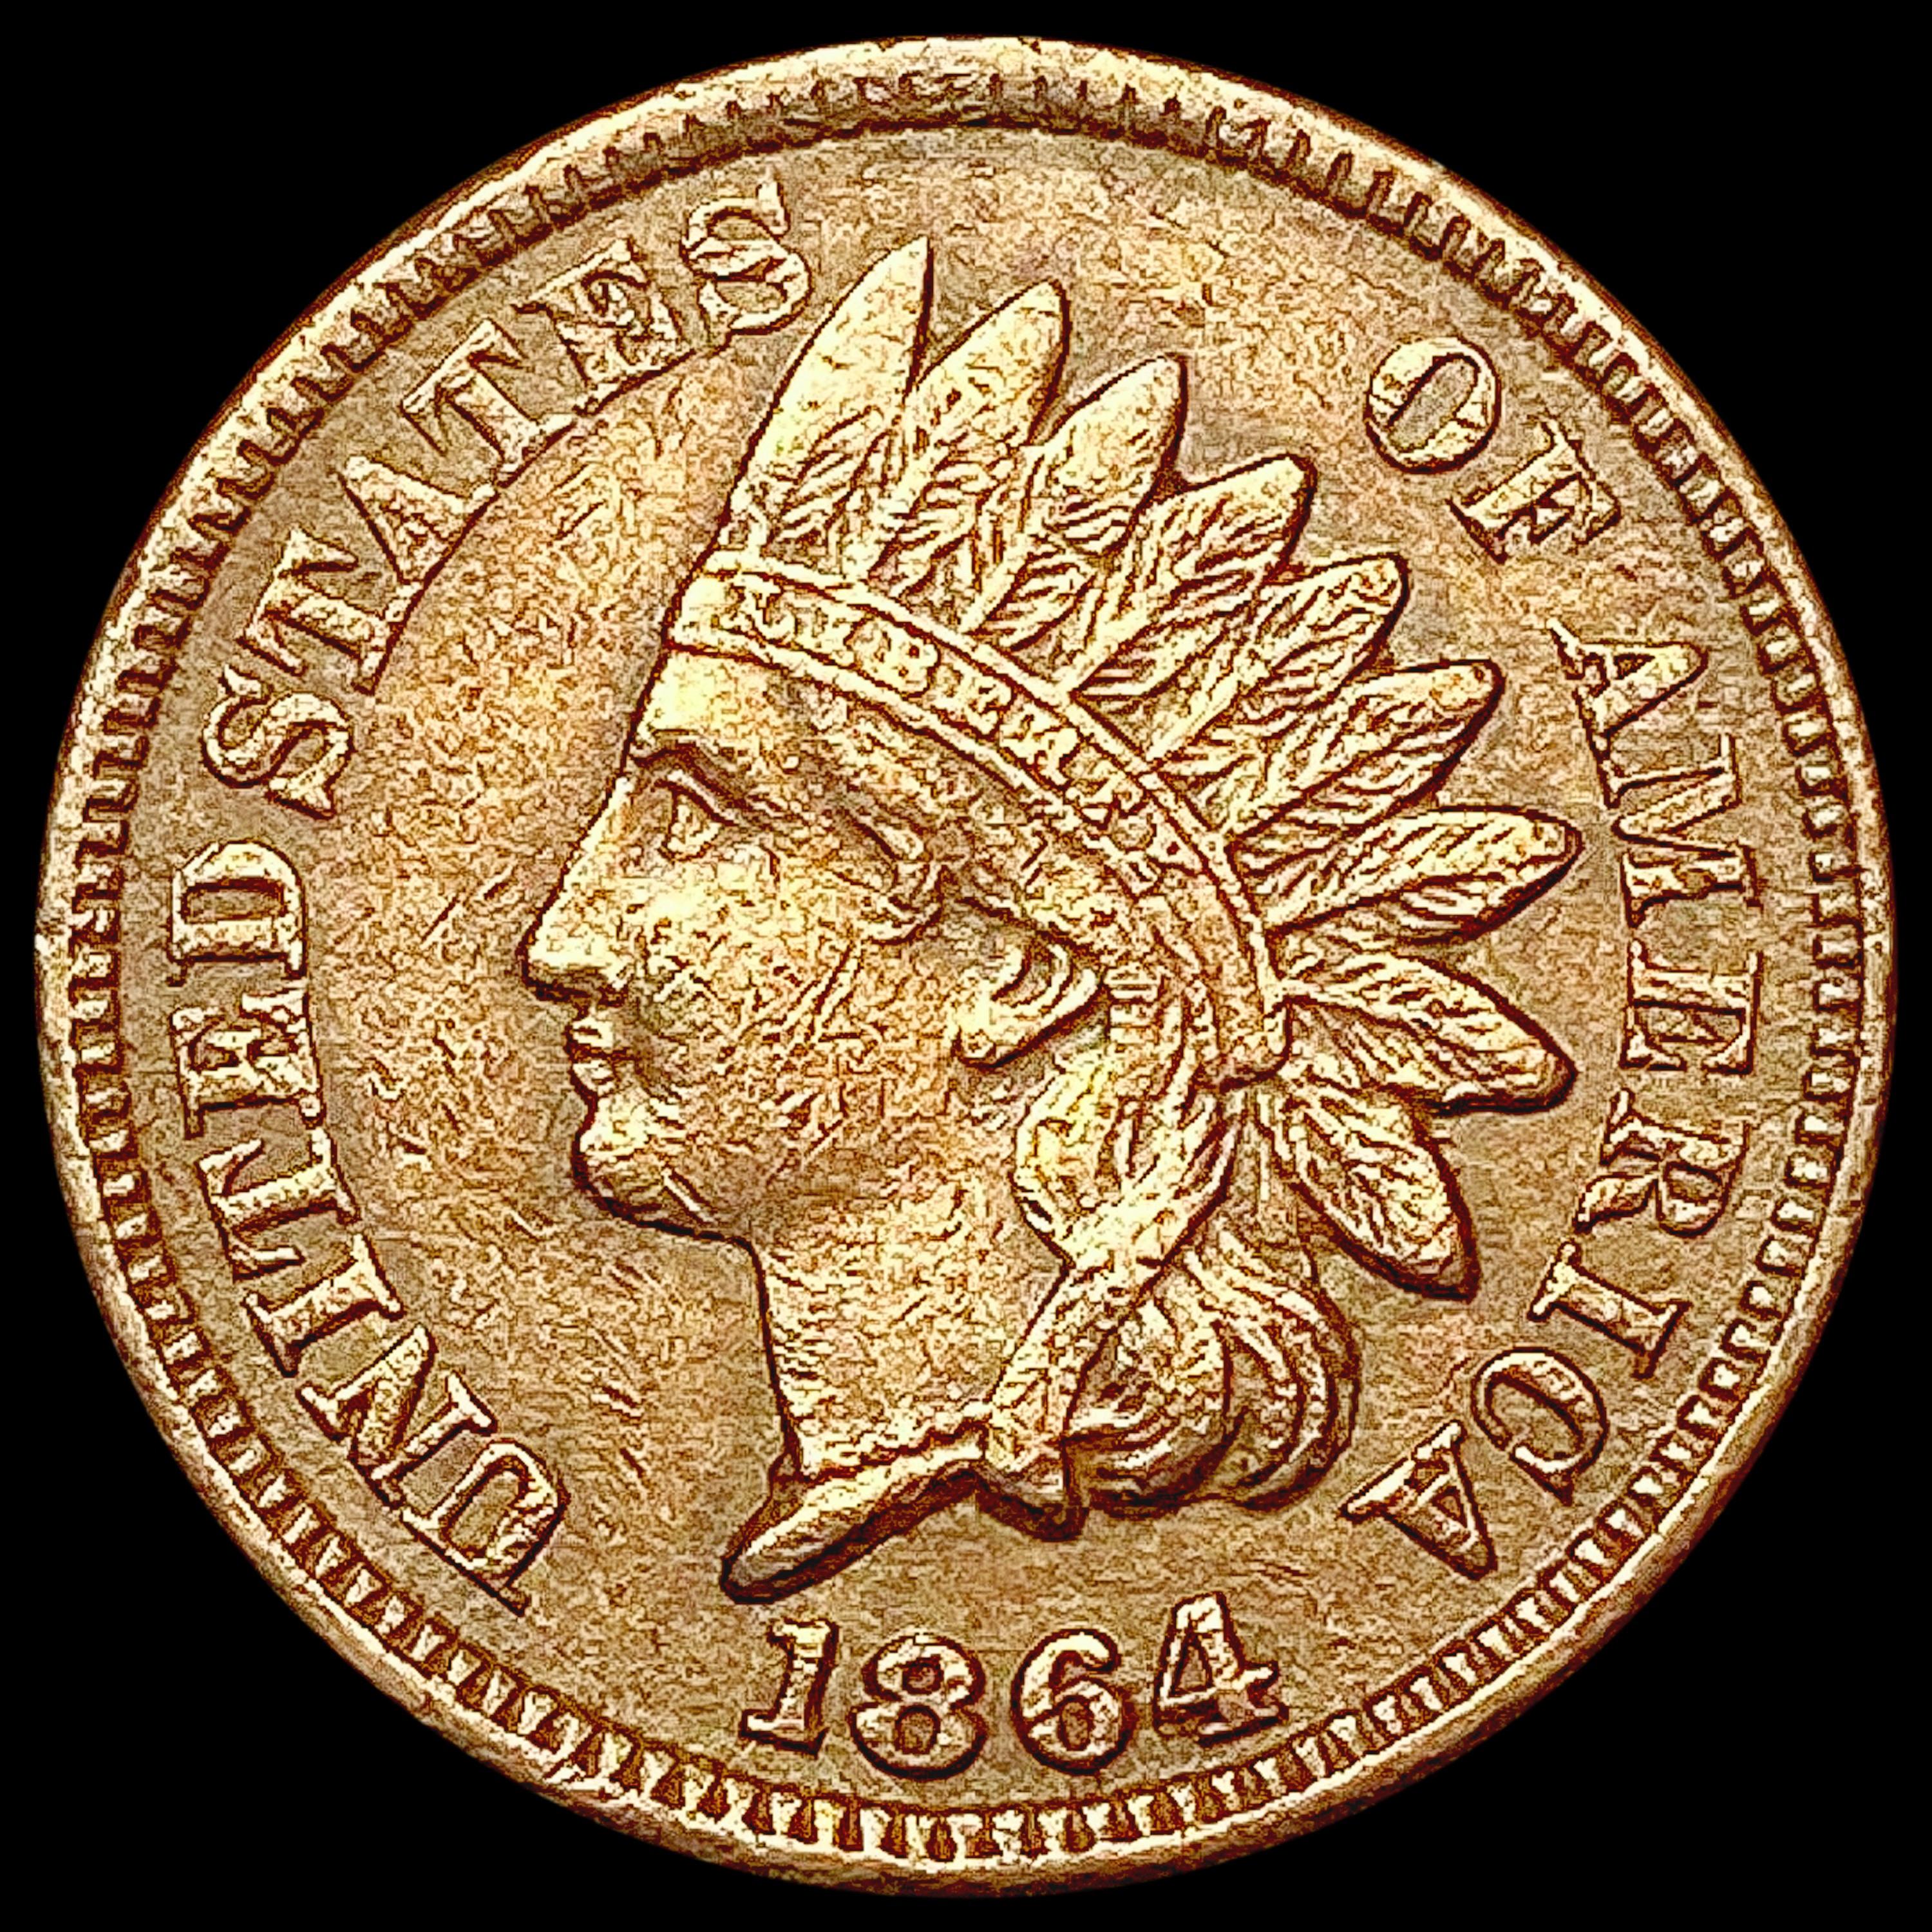 1864 Indian Head Cent NEARLY UNCIRCULATED